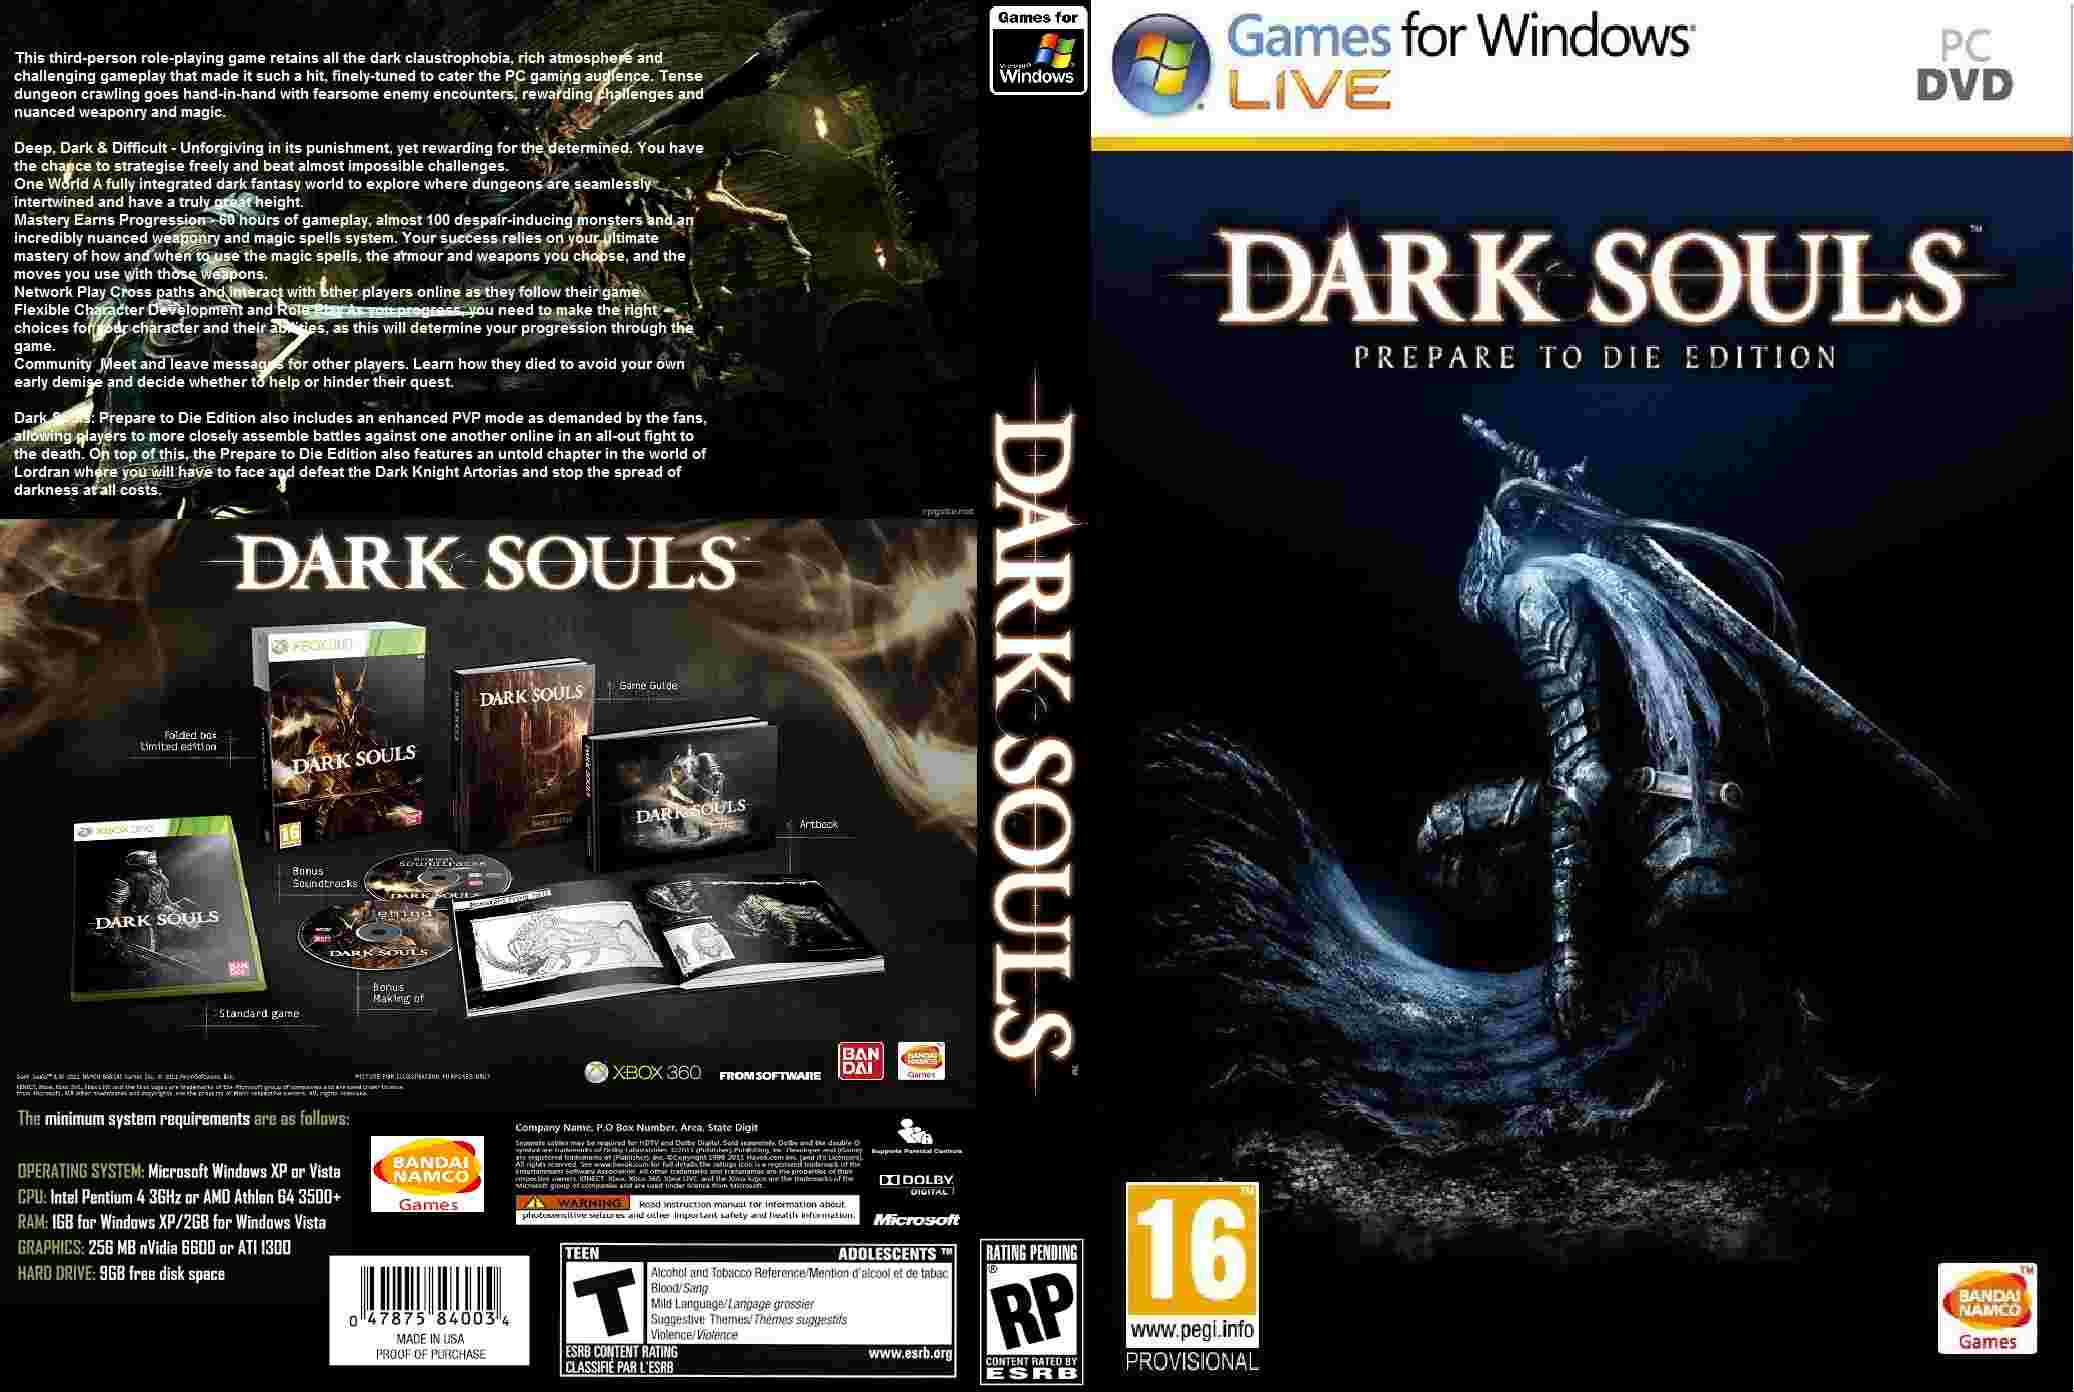 Games for a living. Дарк соулс диск. Дарк соулс 1 диск. Dark Souls 3 диск. Dark Souls 1 ps3 диск.